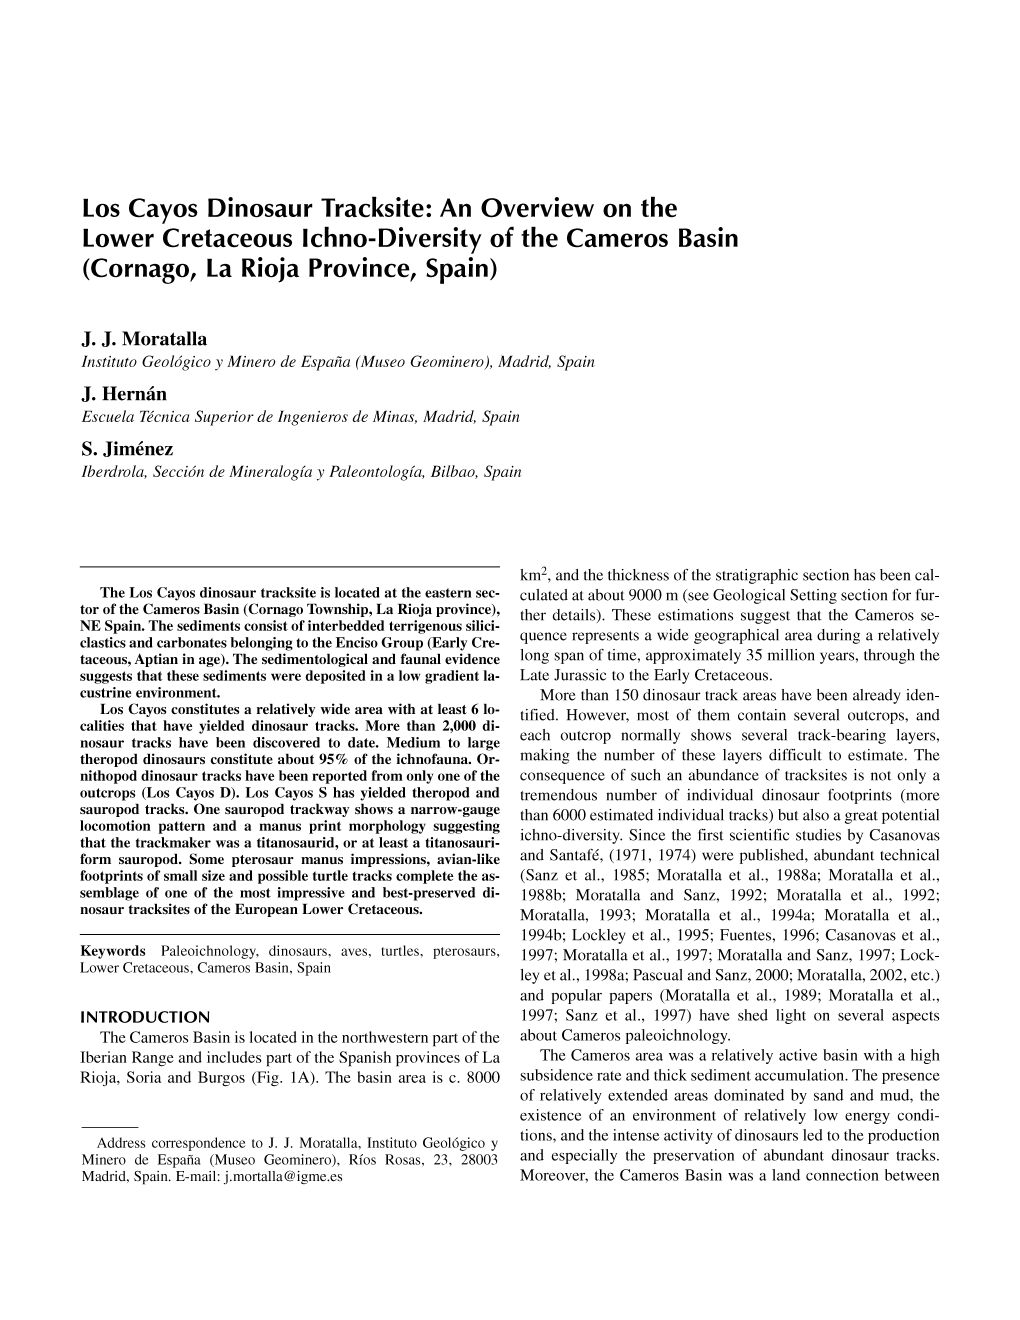 Los Cayos Dinosaur Tracksite: an Overview on the Lower Cretaceous Lchno-Diversity of the Cameros Basin (Cornago, La Rioja Province, Spain)